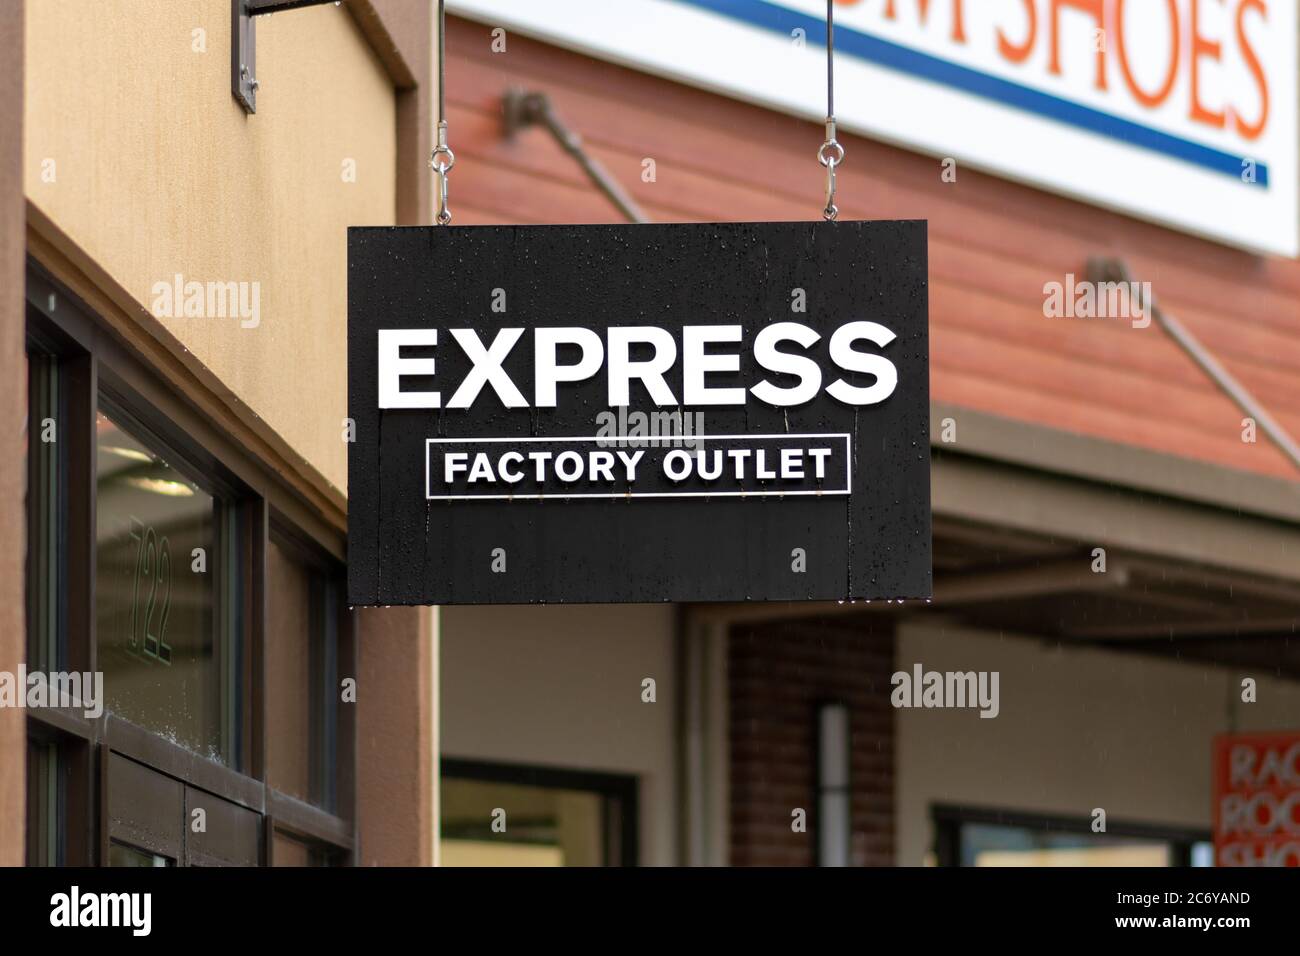 Store Directory for Clarksburg Premium Outlets® - A Shopping